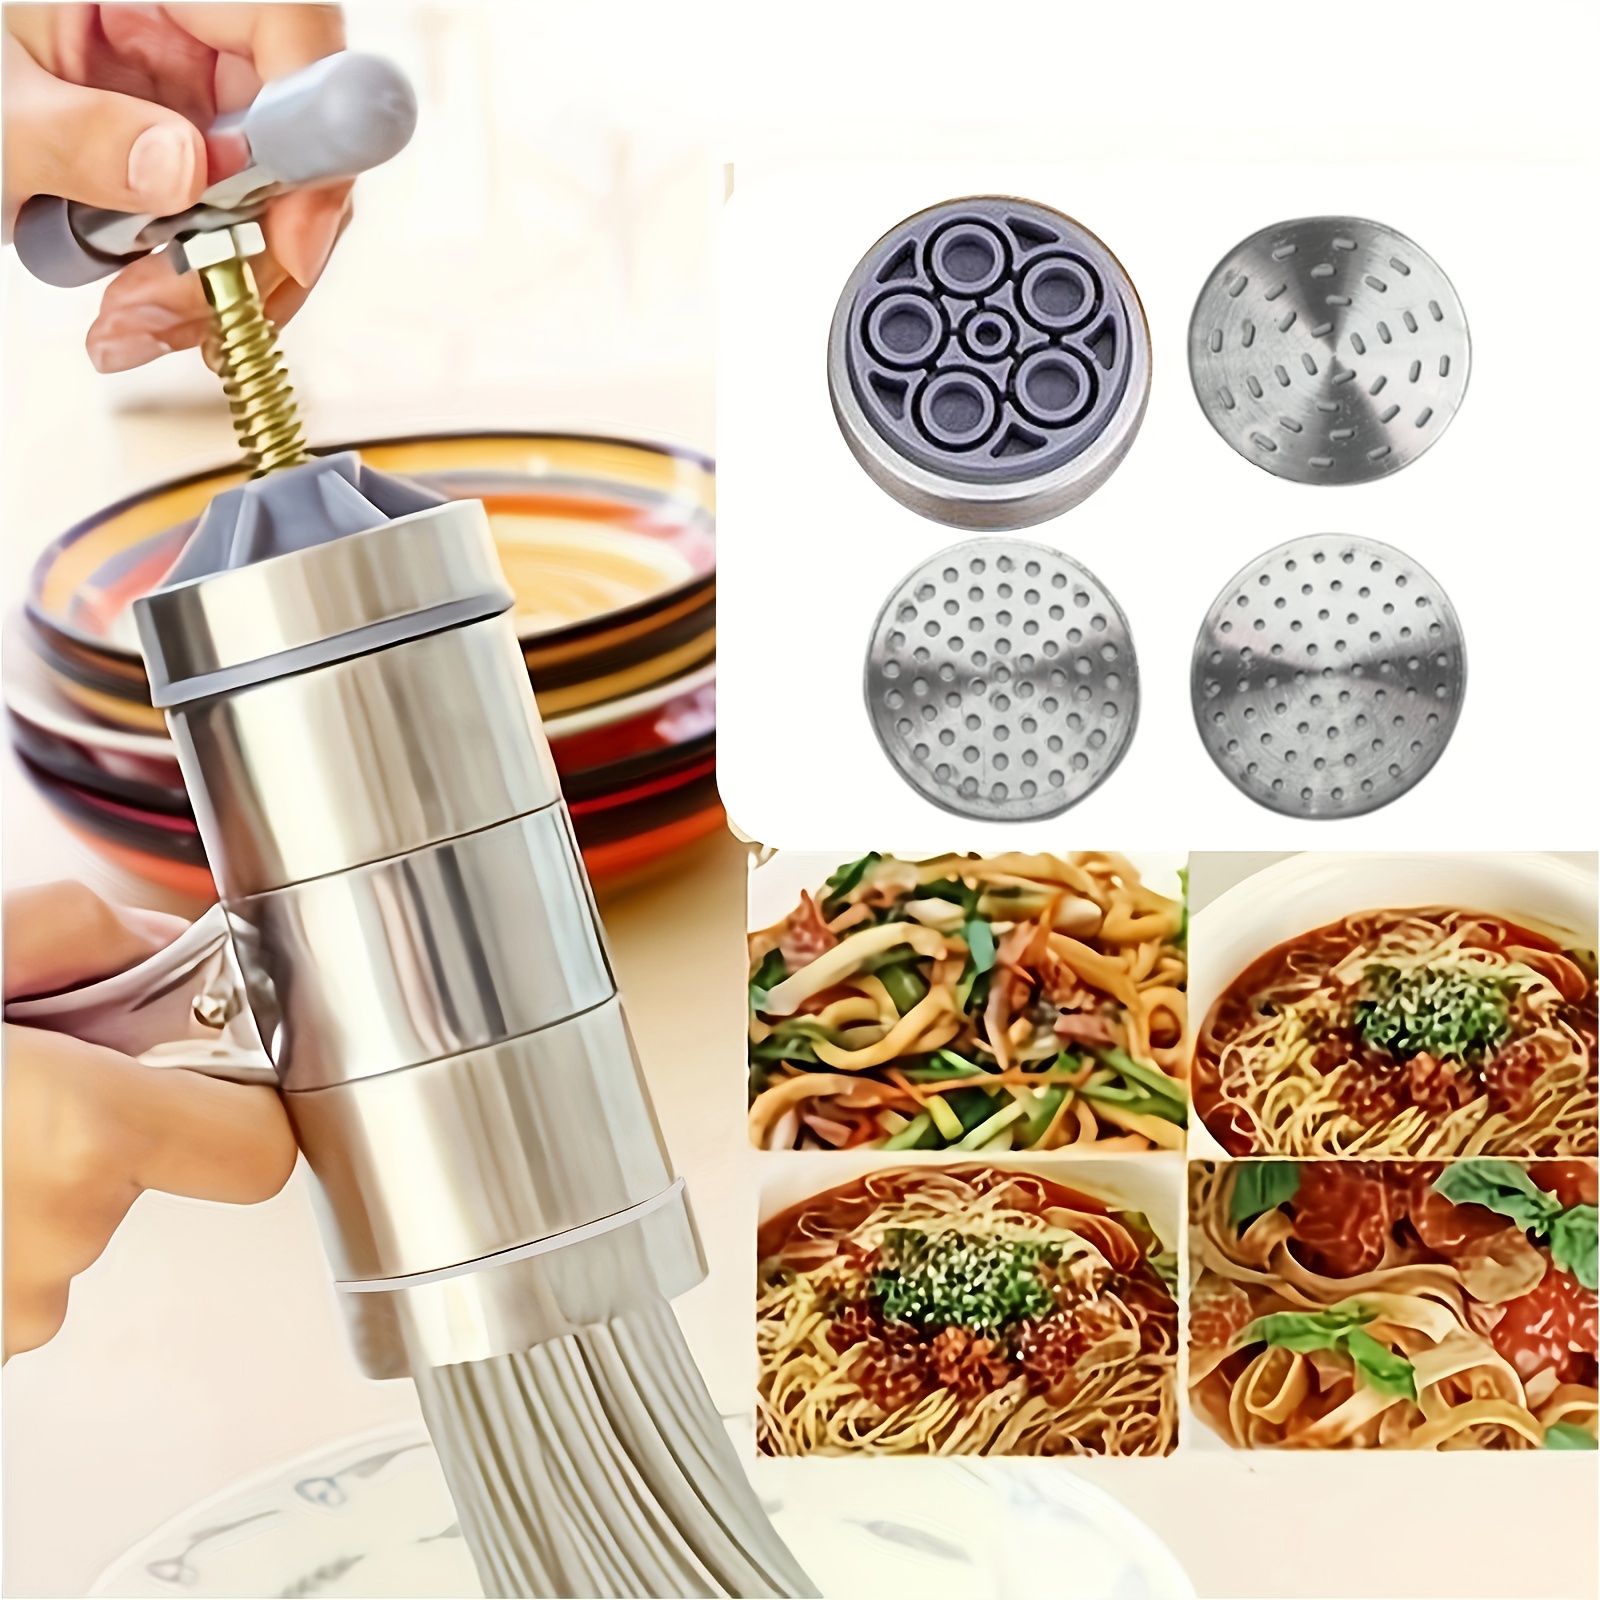 Manual Noodle Making Machine, Hand-cranked Stainless Steel Manual